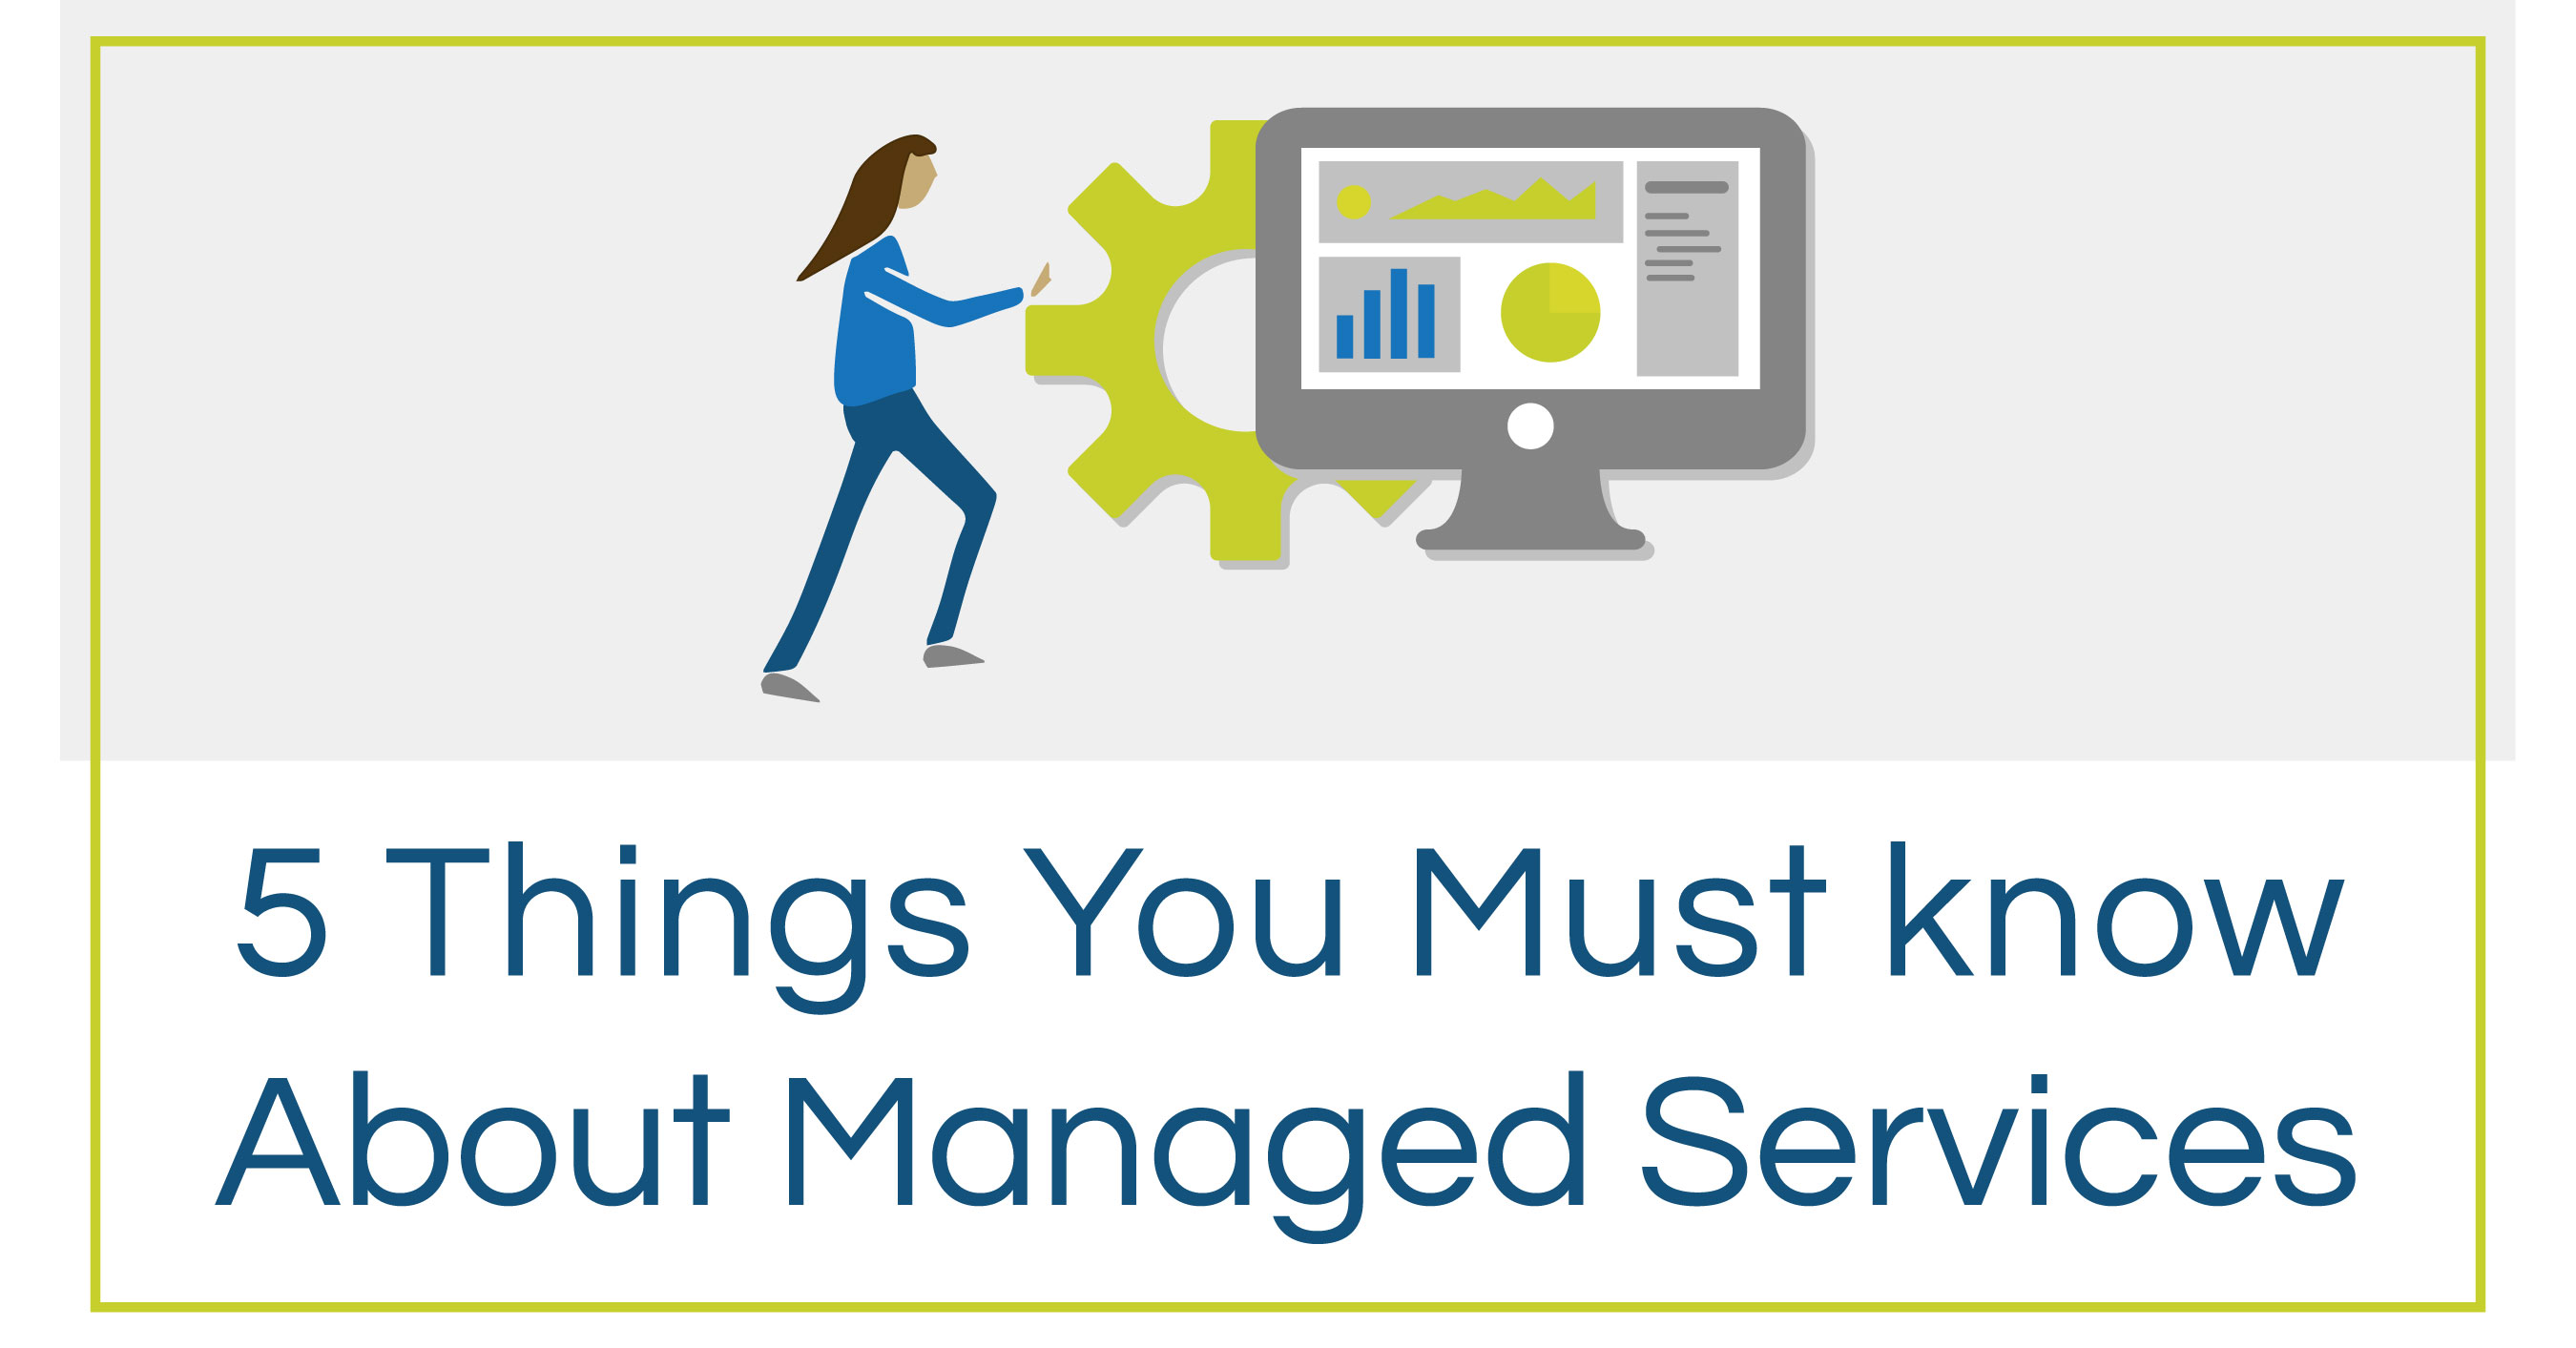 5 Thing You Must Know About Managed Services